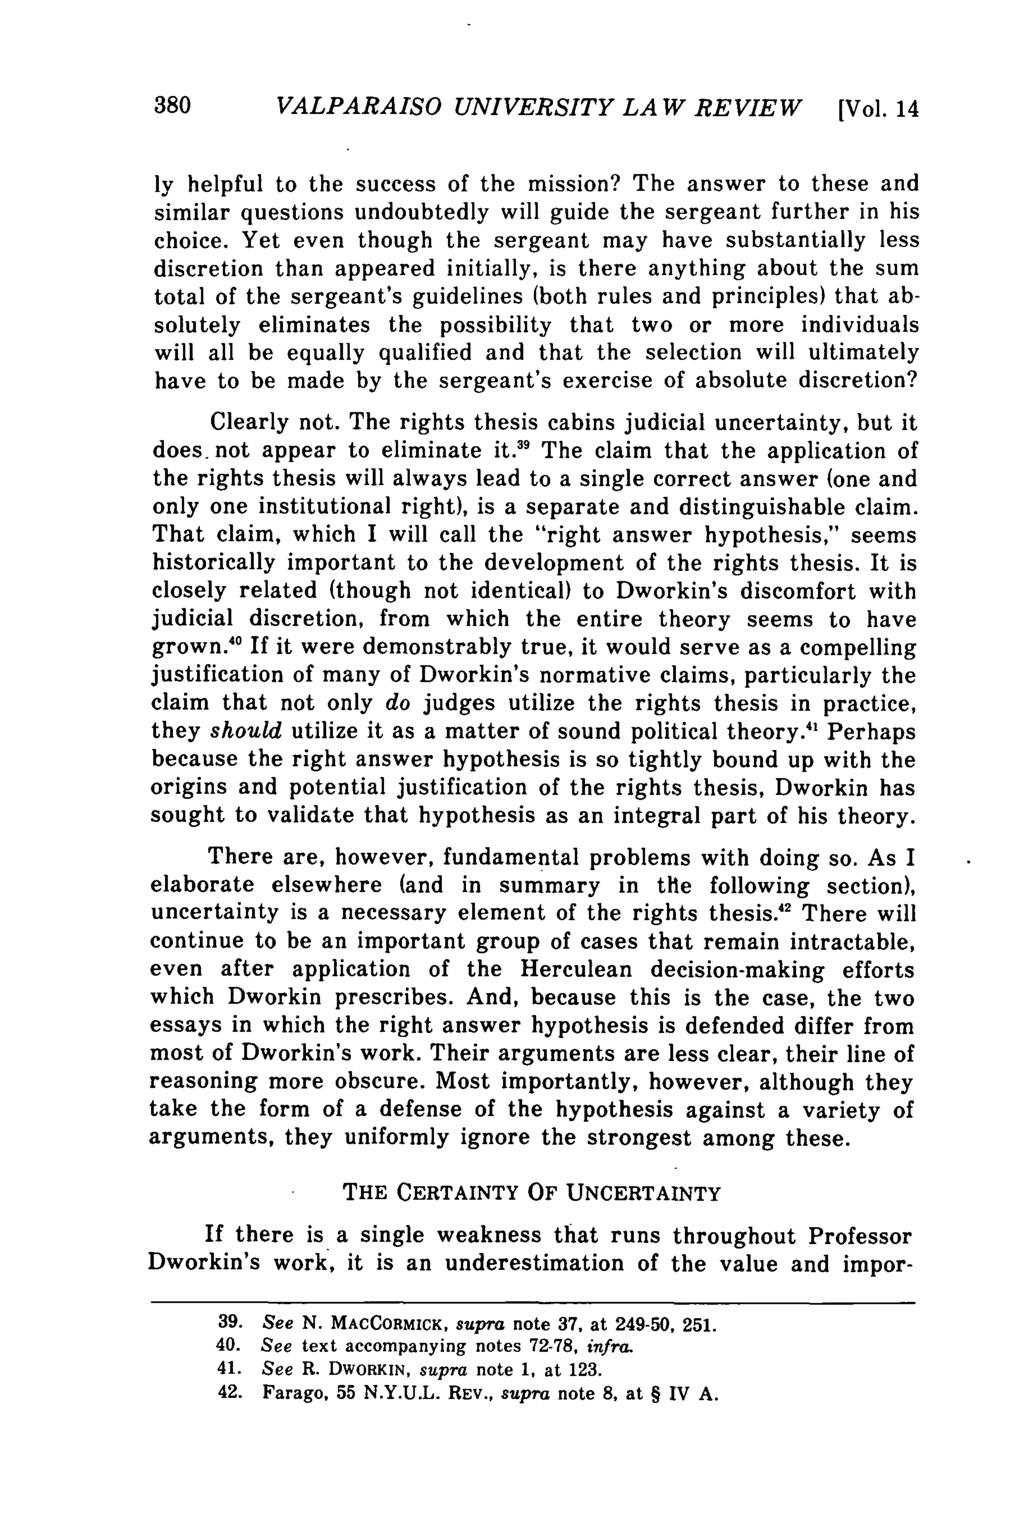 Valparaiso University Law Review, Vol. 14, No. 3 [1980], Art. 1 380 VALPARAISO UNIVERSITY LA W REVIEW [Vol. 14 ly helpful to the success of the mission?